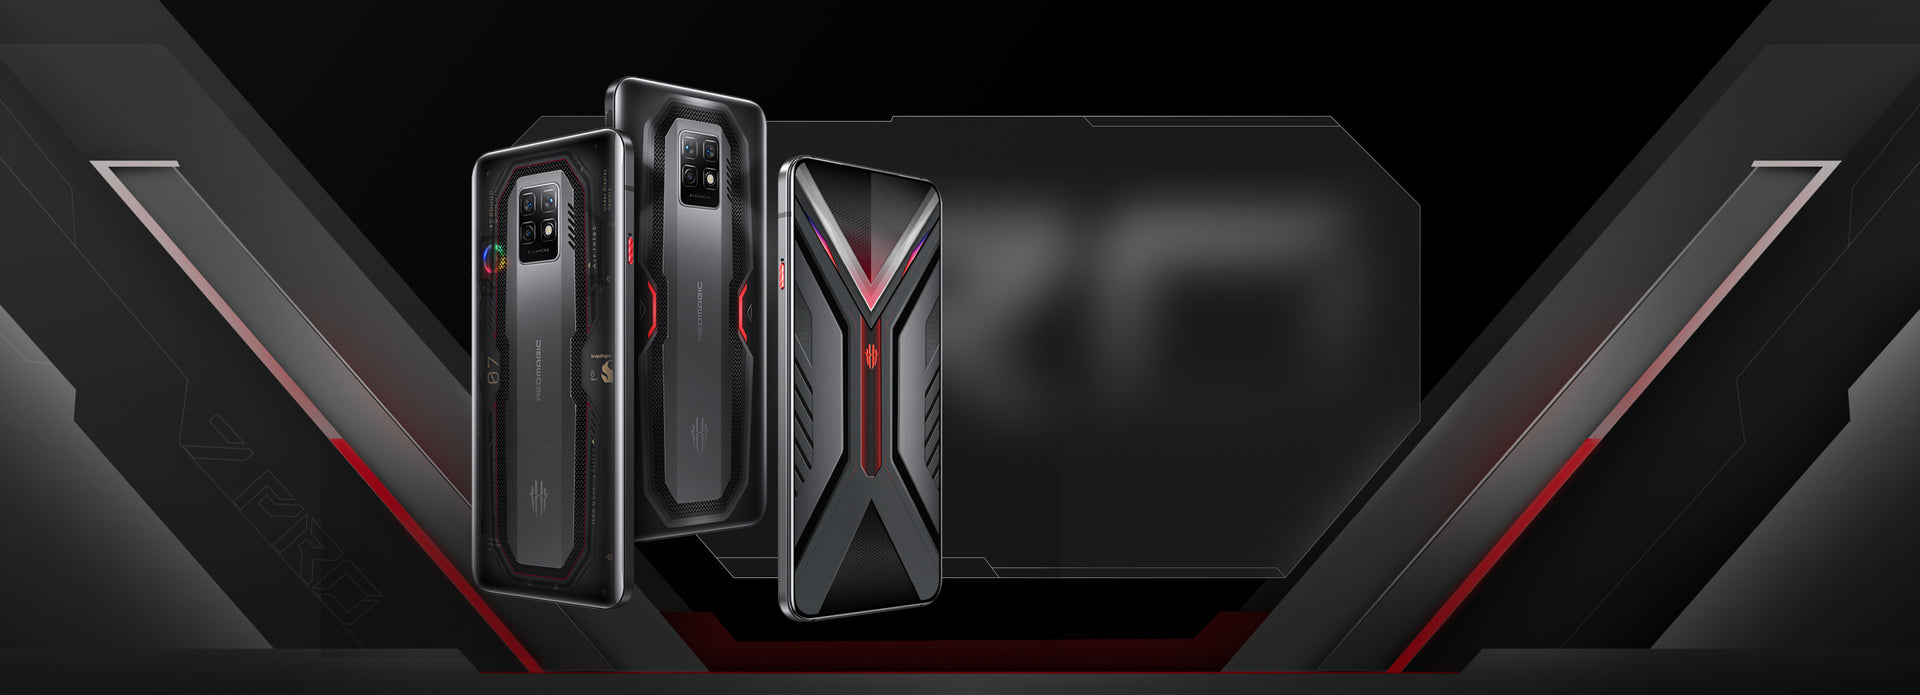 REDMAGIC 7 Pro Gaming Smartphone - Product Page - REDMAGIC (US and Canada)